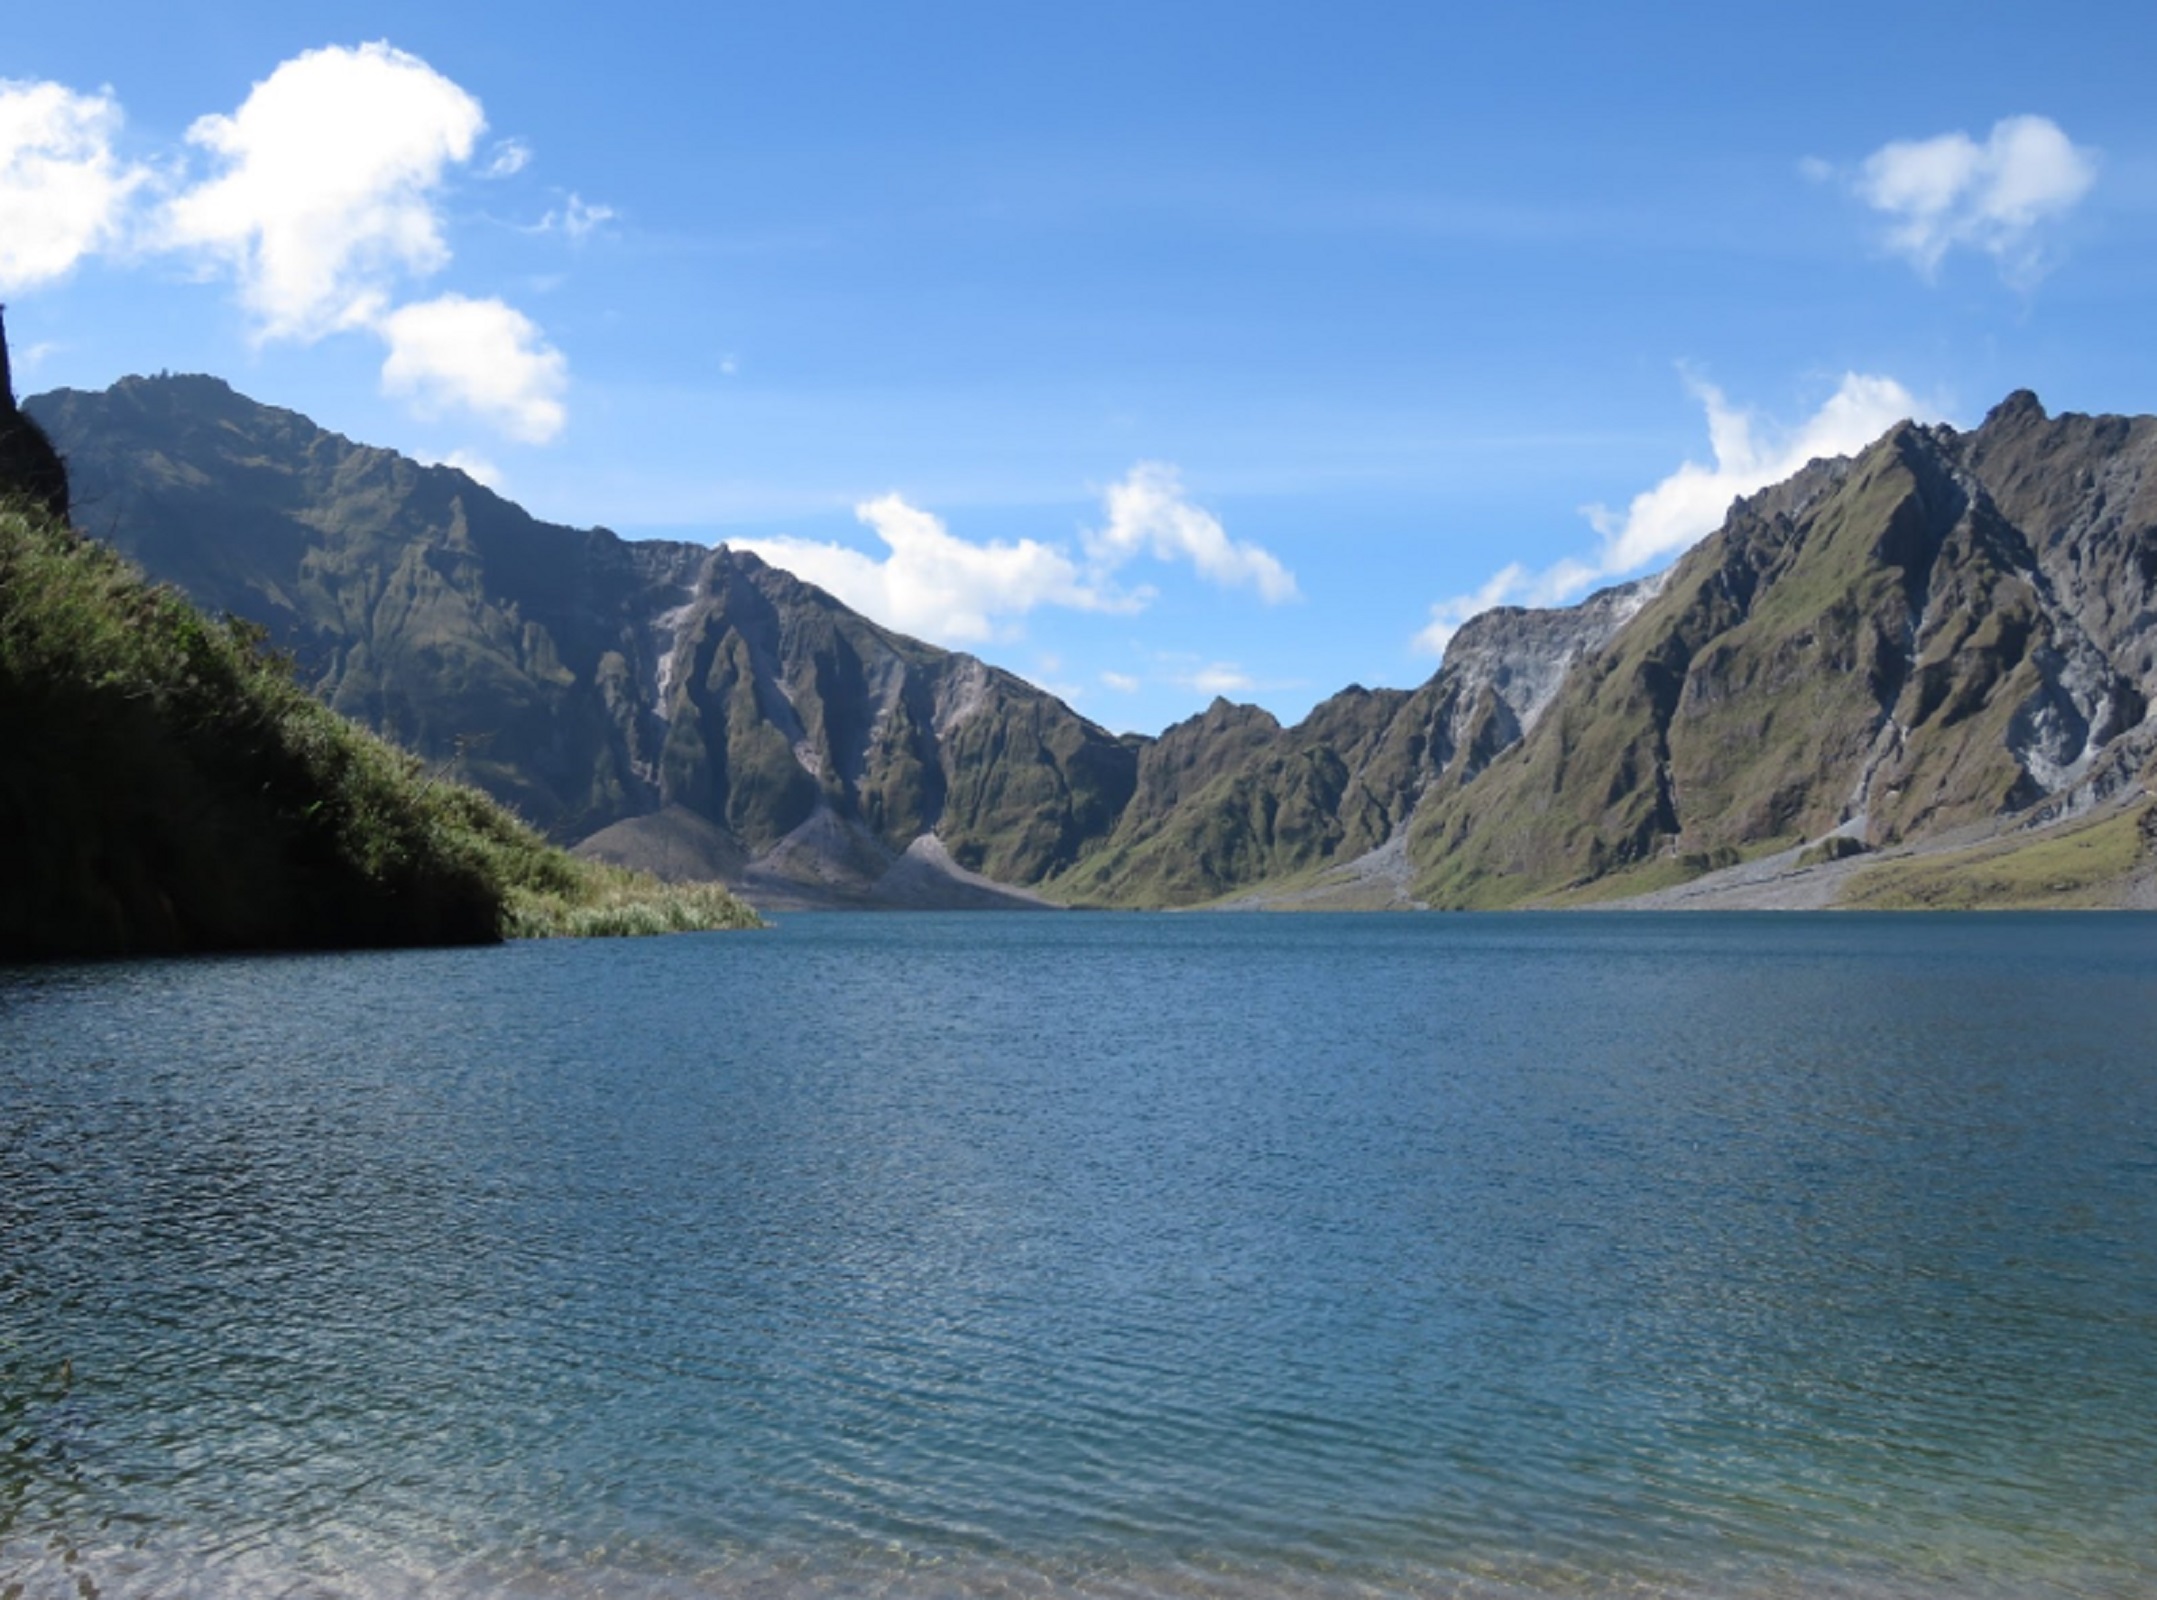 Guided Full Day Hike To Mt Pinatubo Crater Lake With 4x4 1083